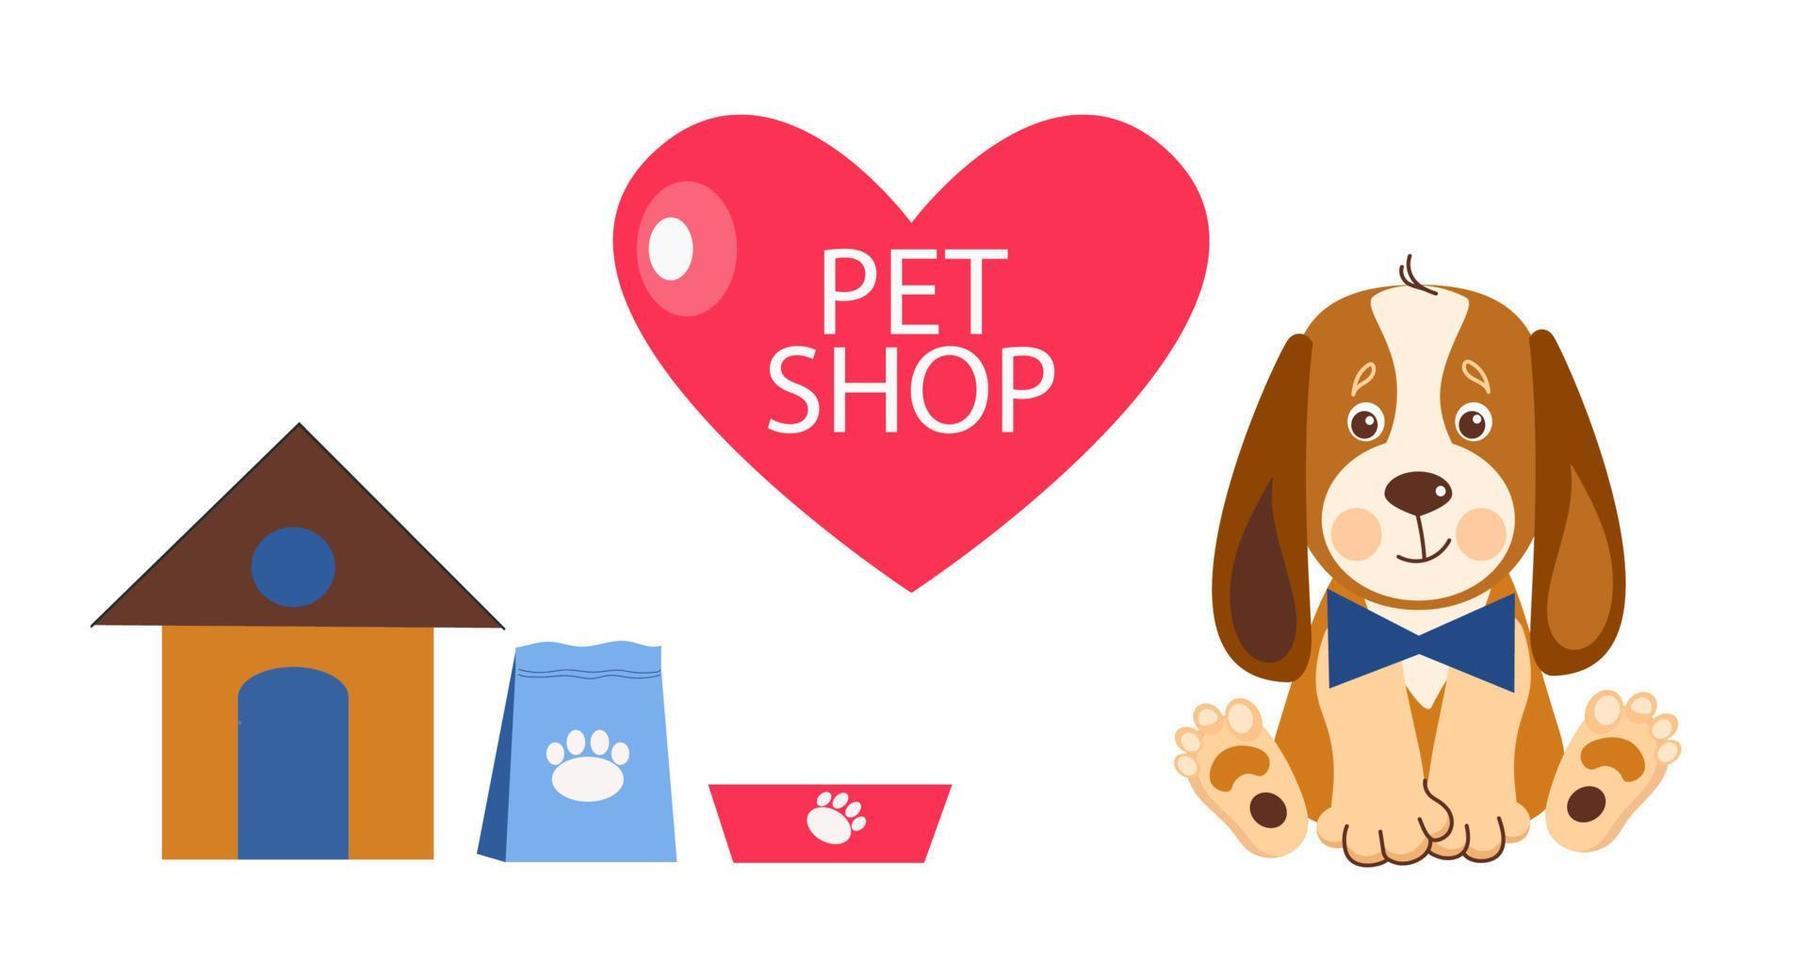 Pet shop banner design template. Vector cartoon illustration of cats, dogs, house, food.